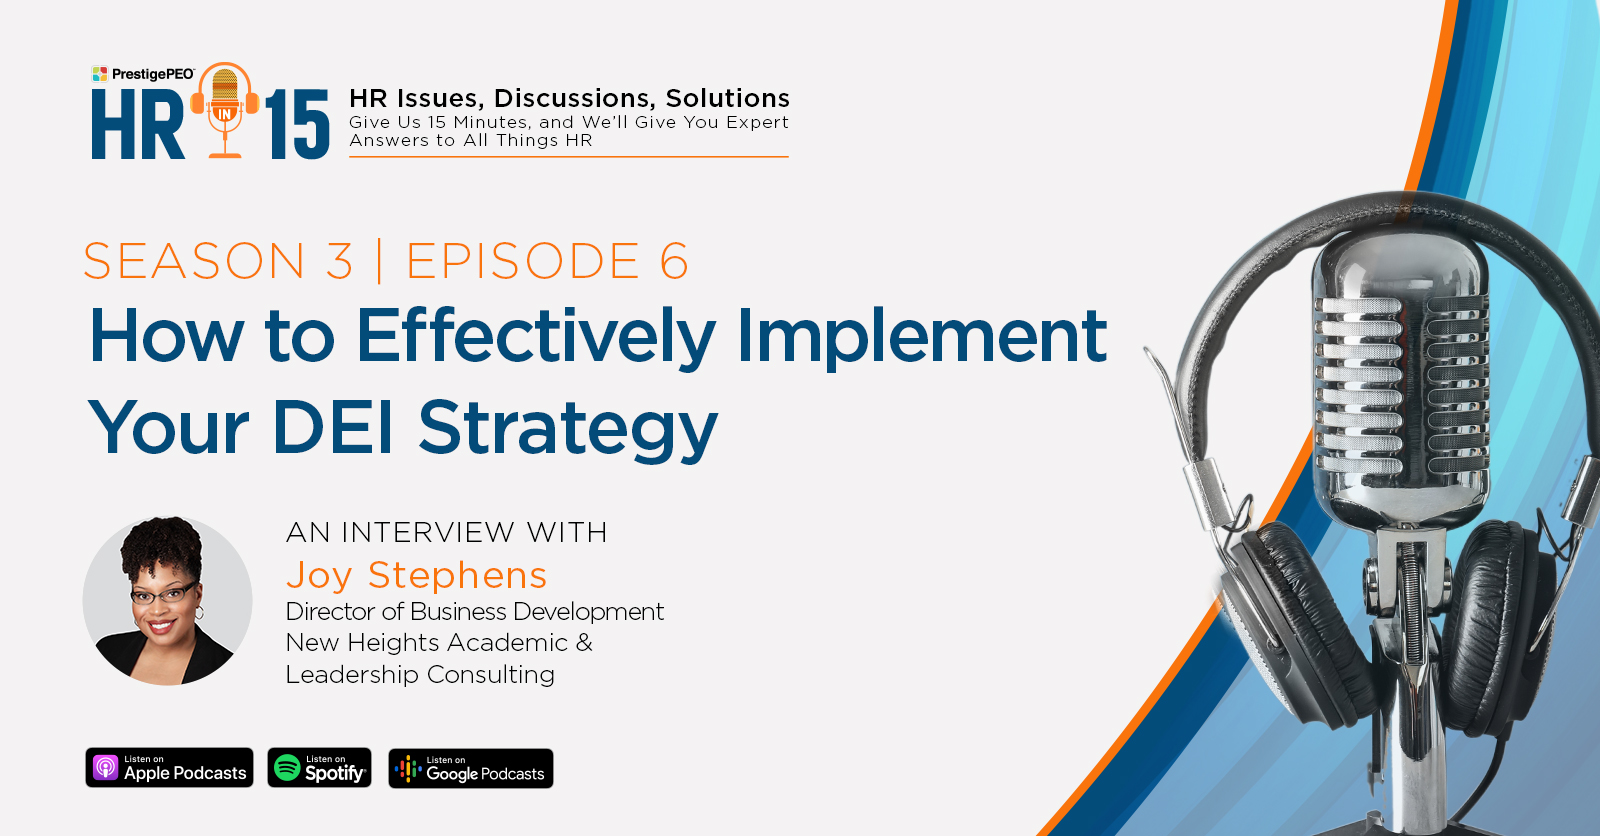 HR-in-15 Interview with Joy Stephens: How to effectively implement your DEI strategy